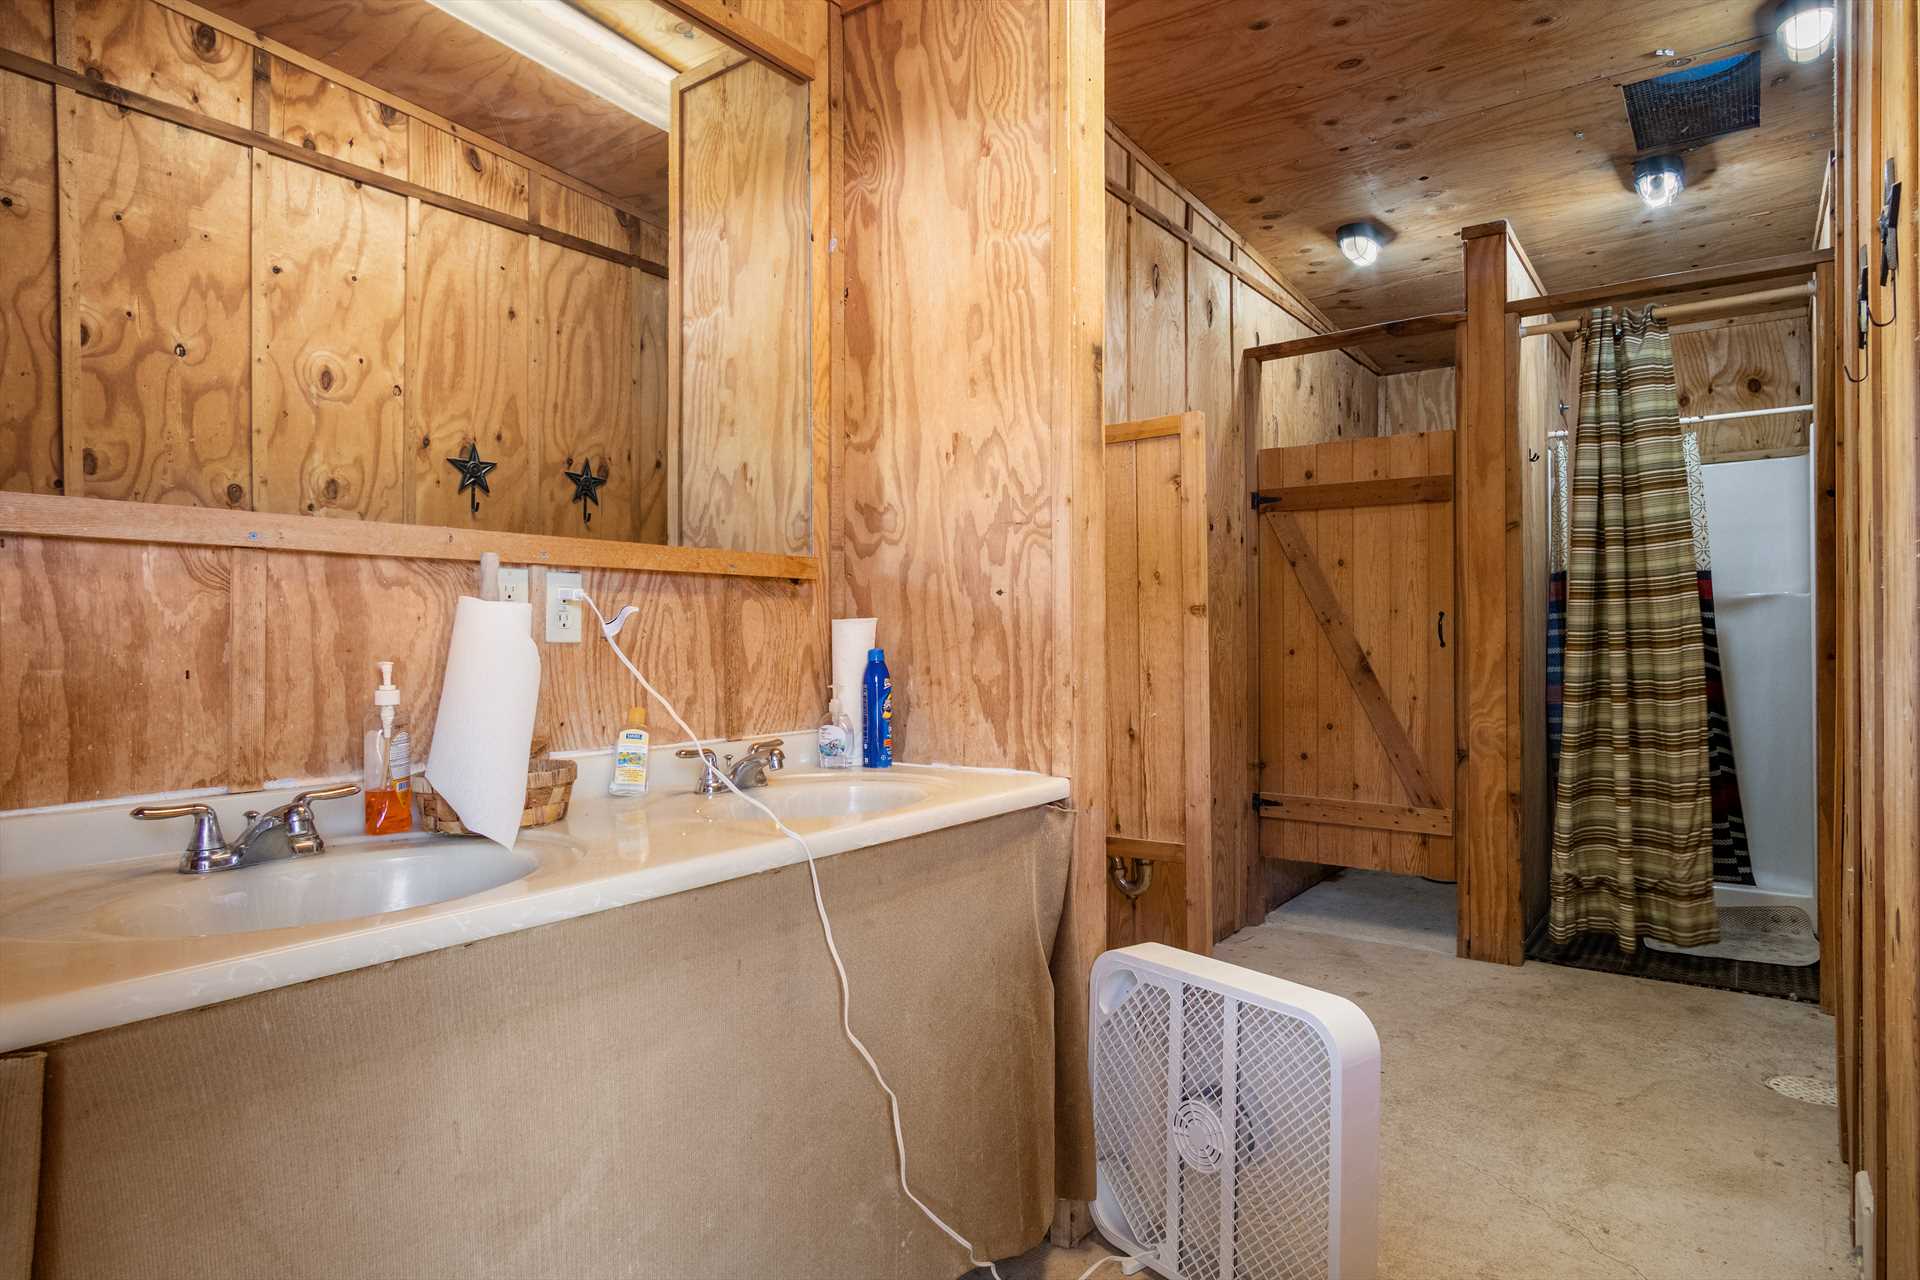                                                 A large vanity with ample counter space is included in both the men's and women's sides of the River Run bath house.